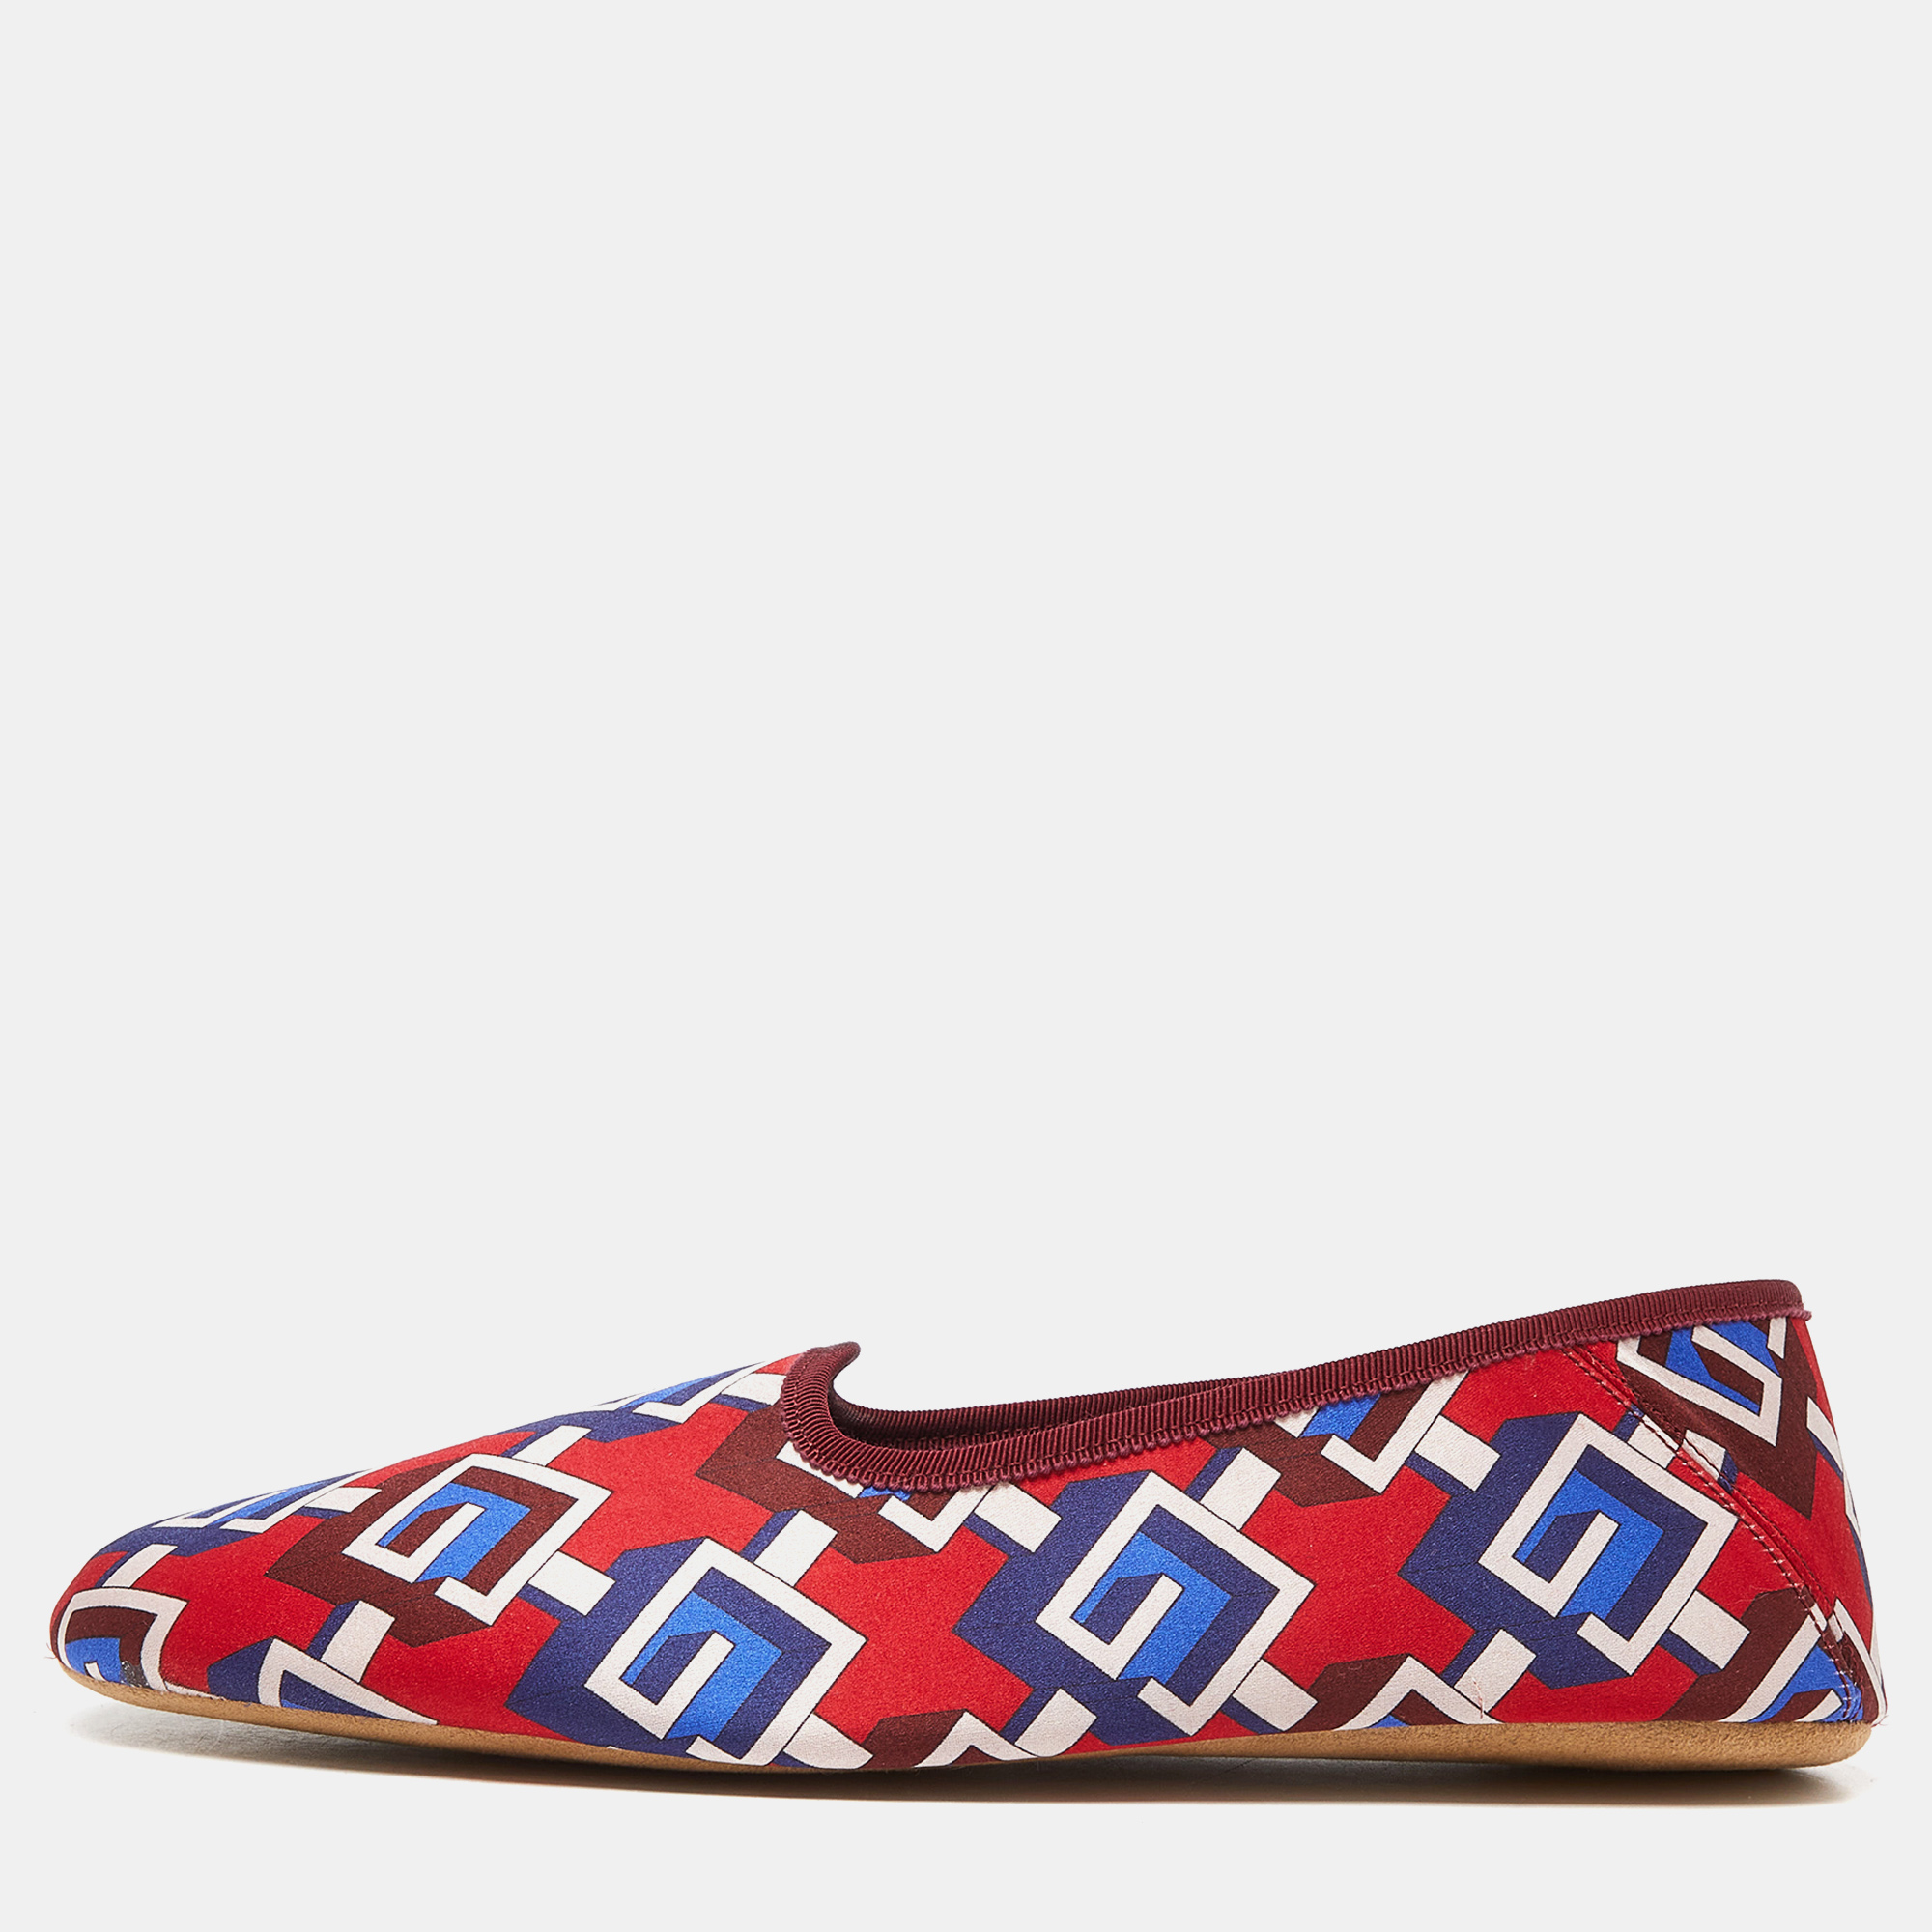 Gucci multicolor isometric g print satin smoking slippers size 44